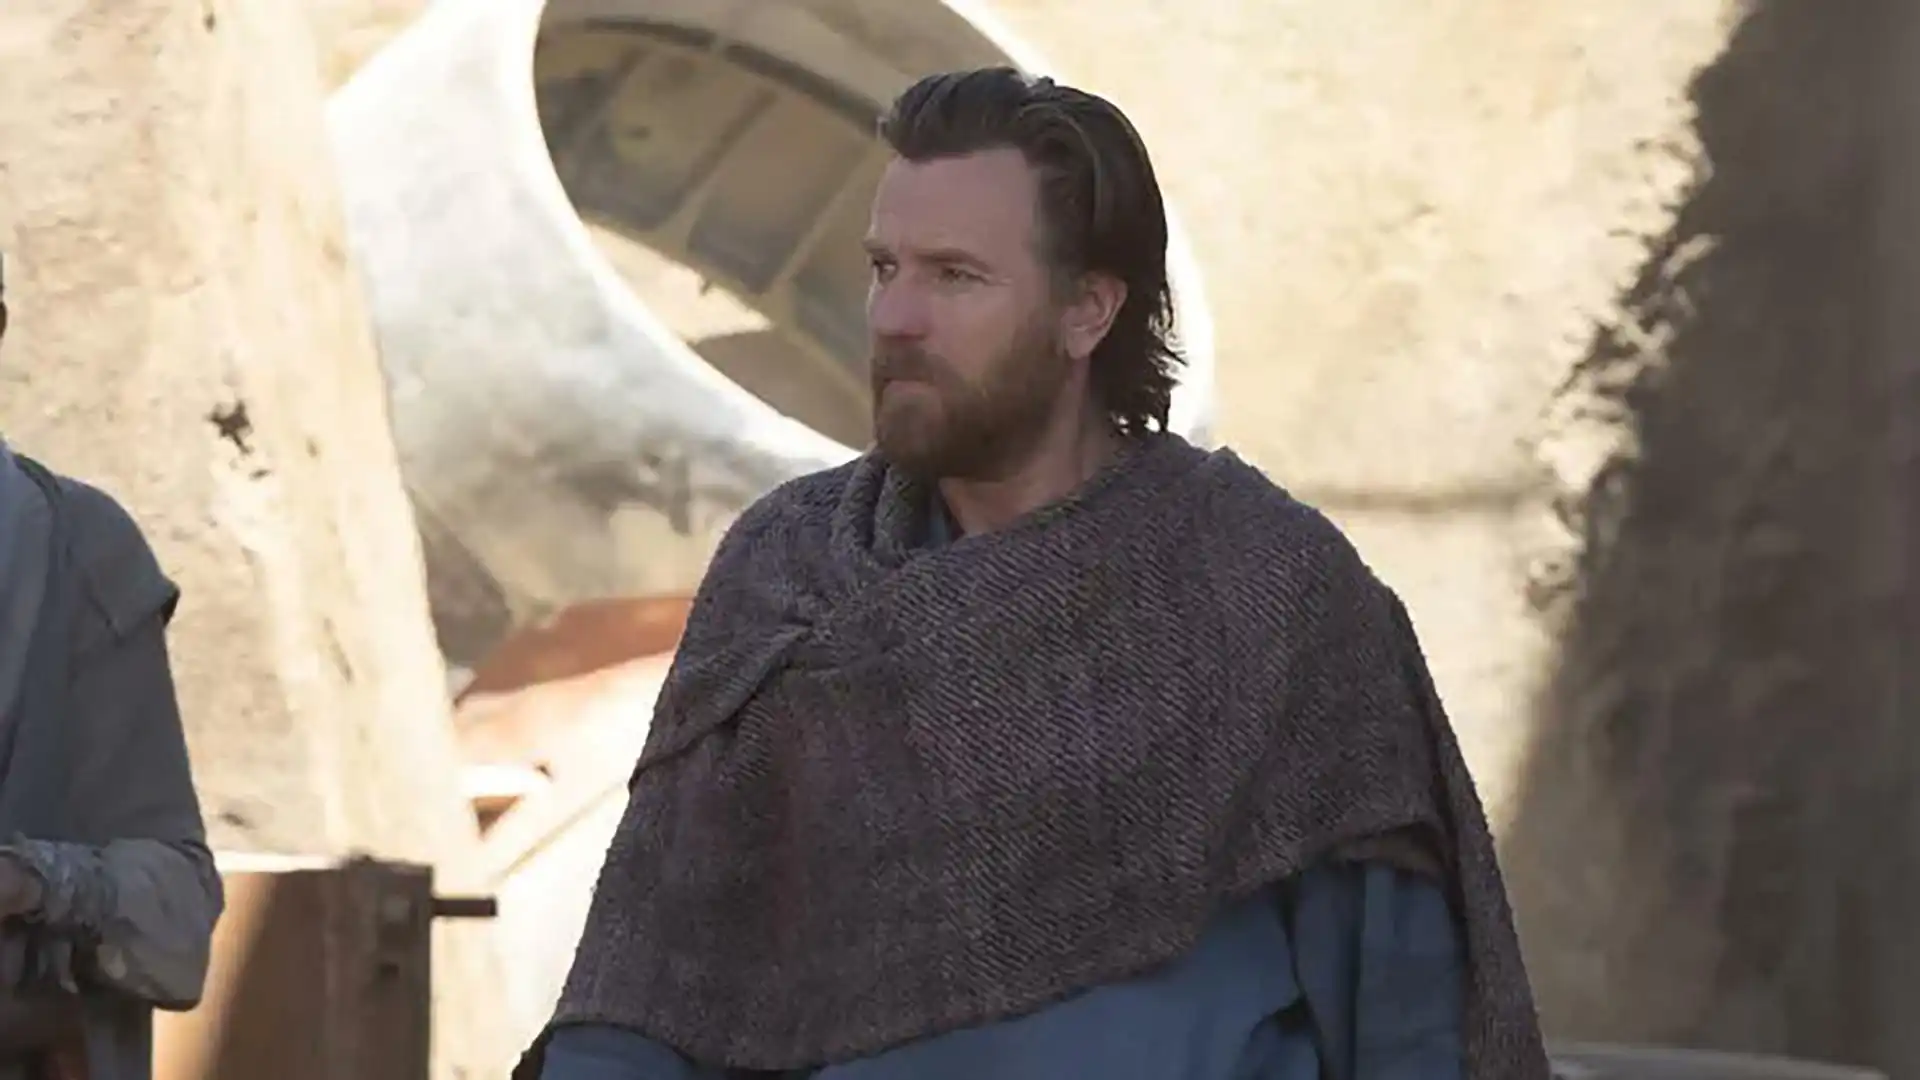 Who are the villagers of Star Wars in the Obi-Wan Kenobi series?